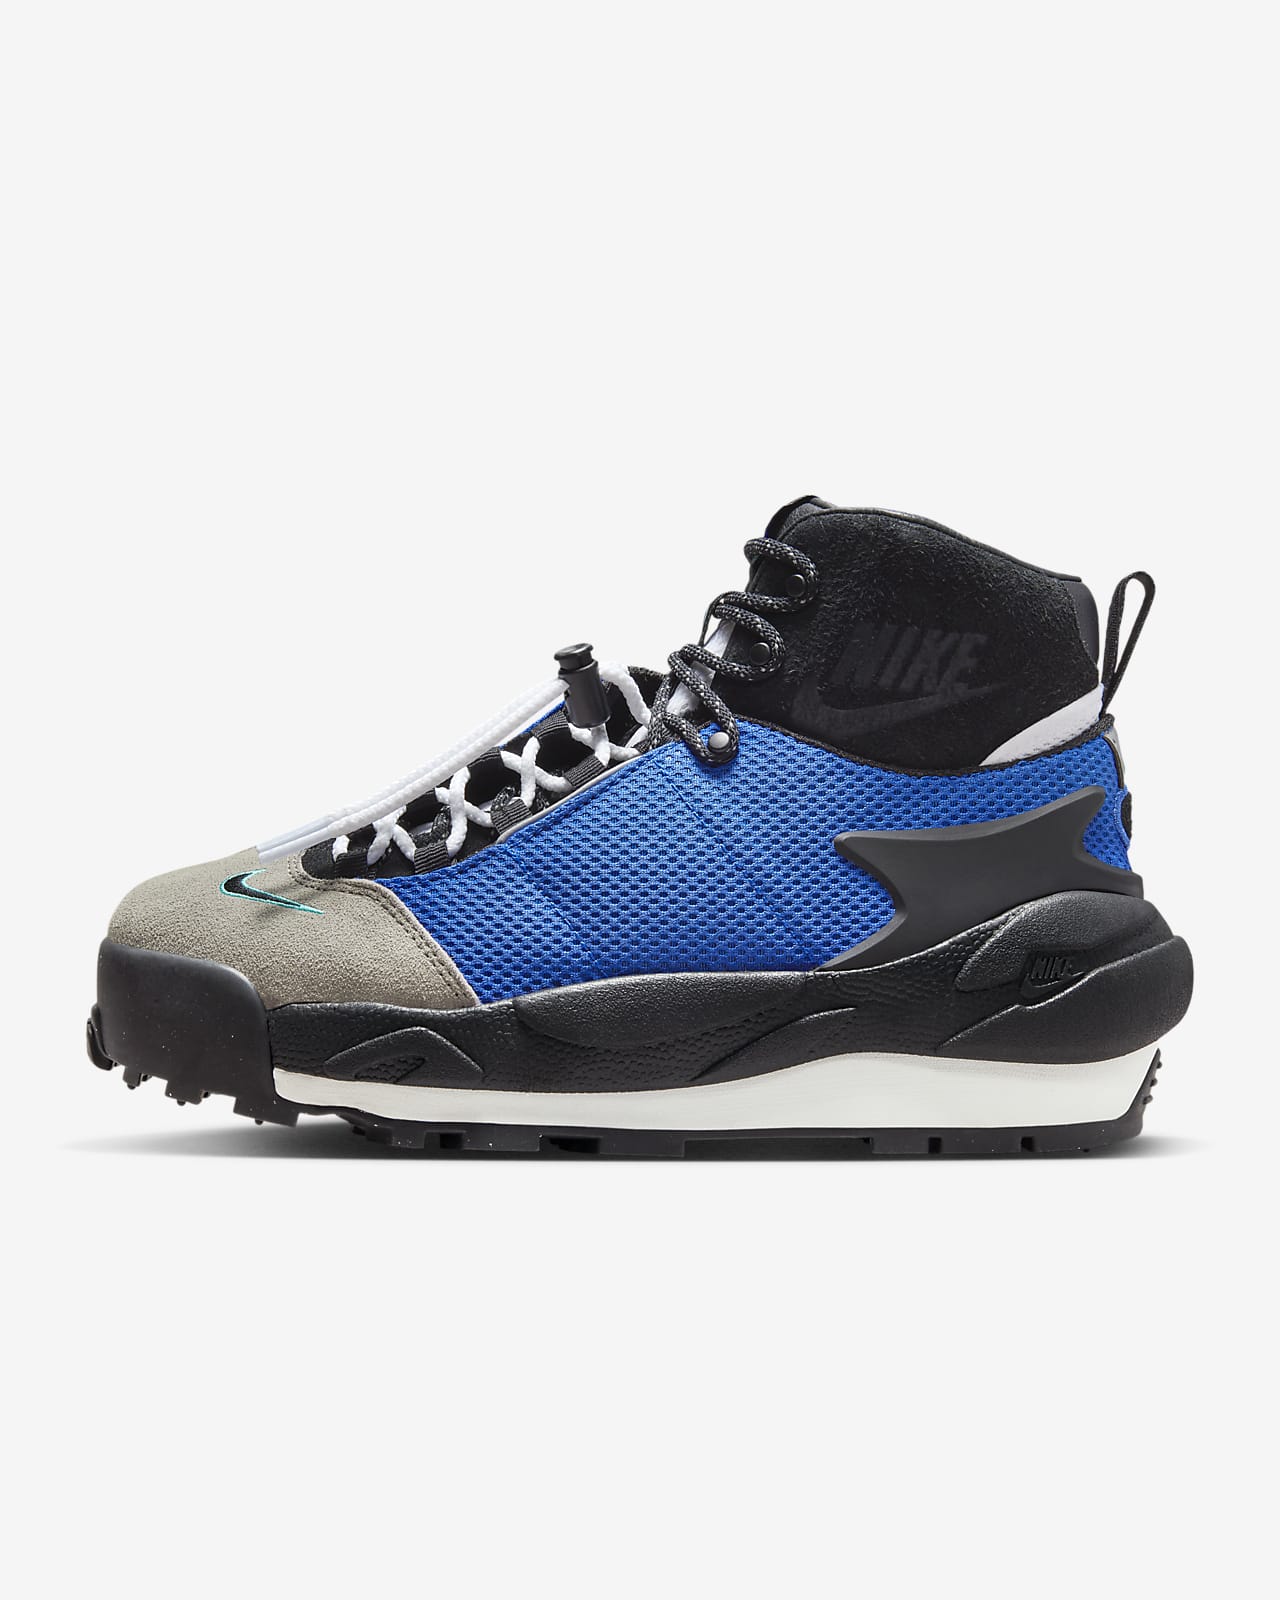 Chaussure Nike Magmascape x sacai pour homme